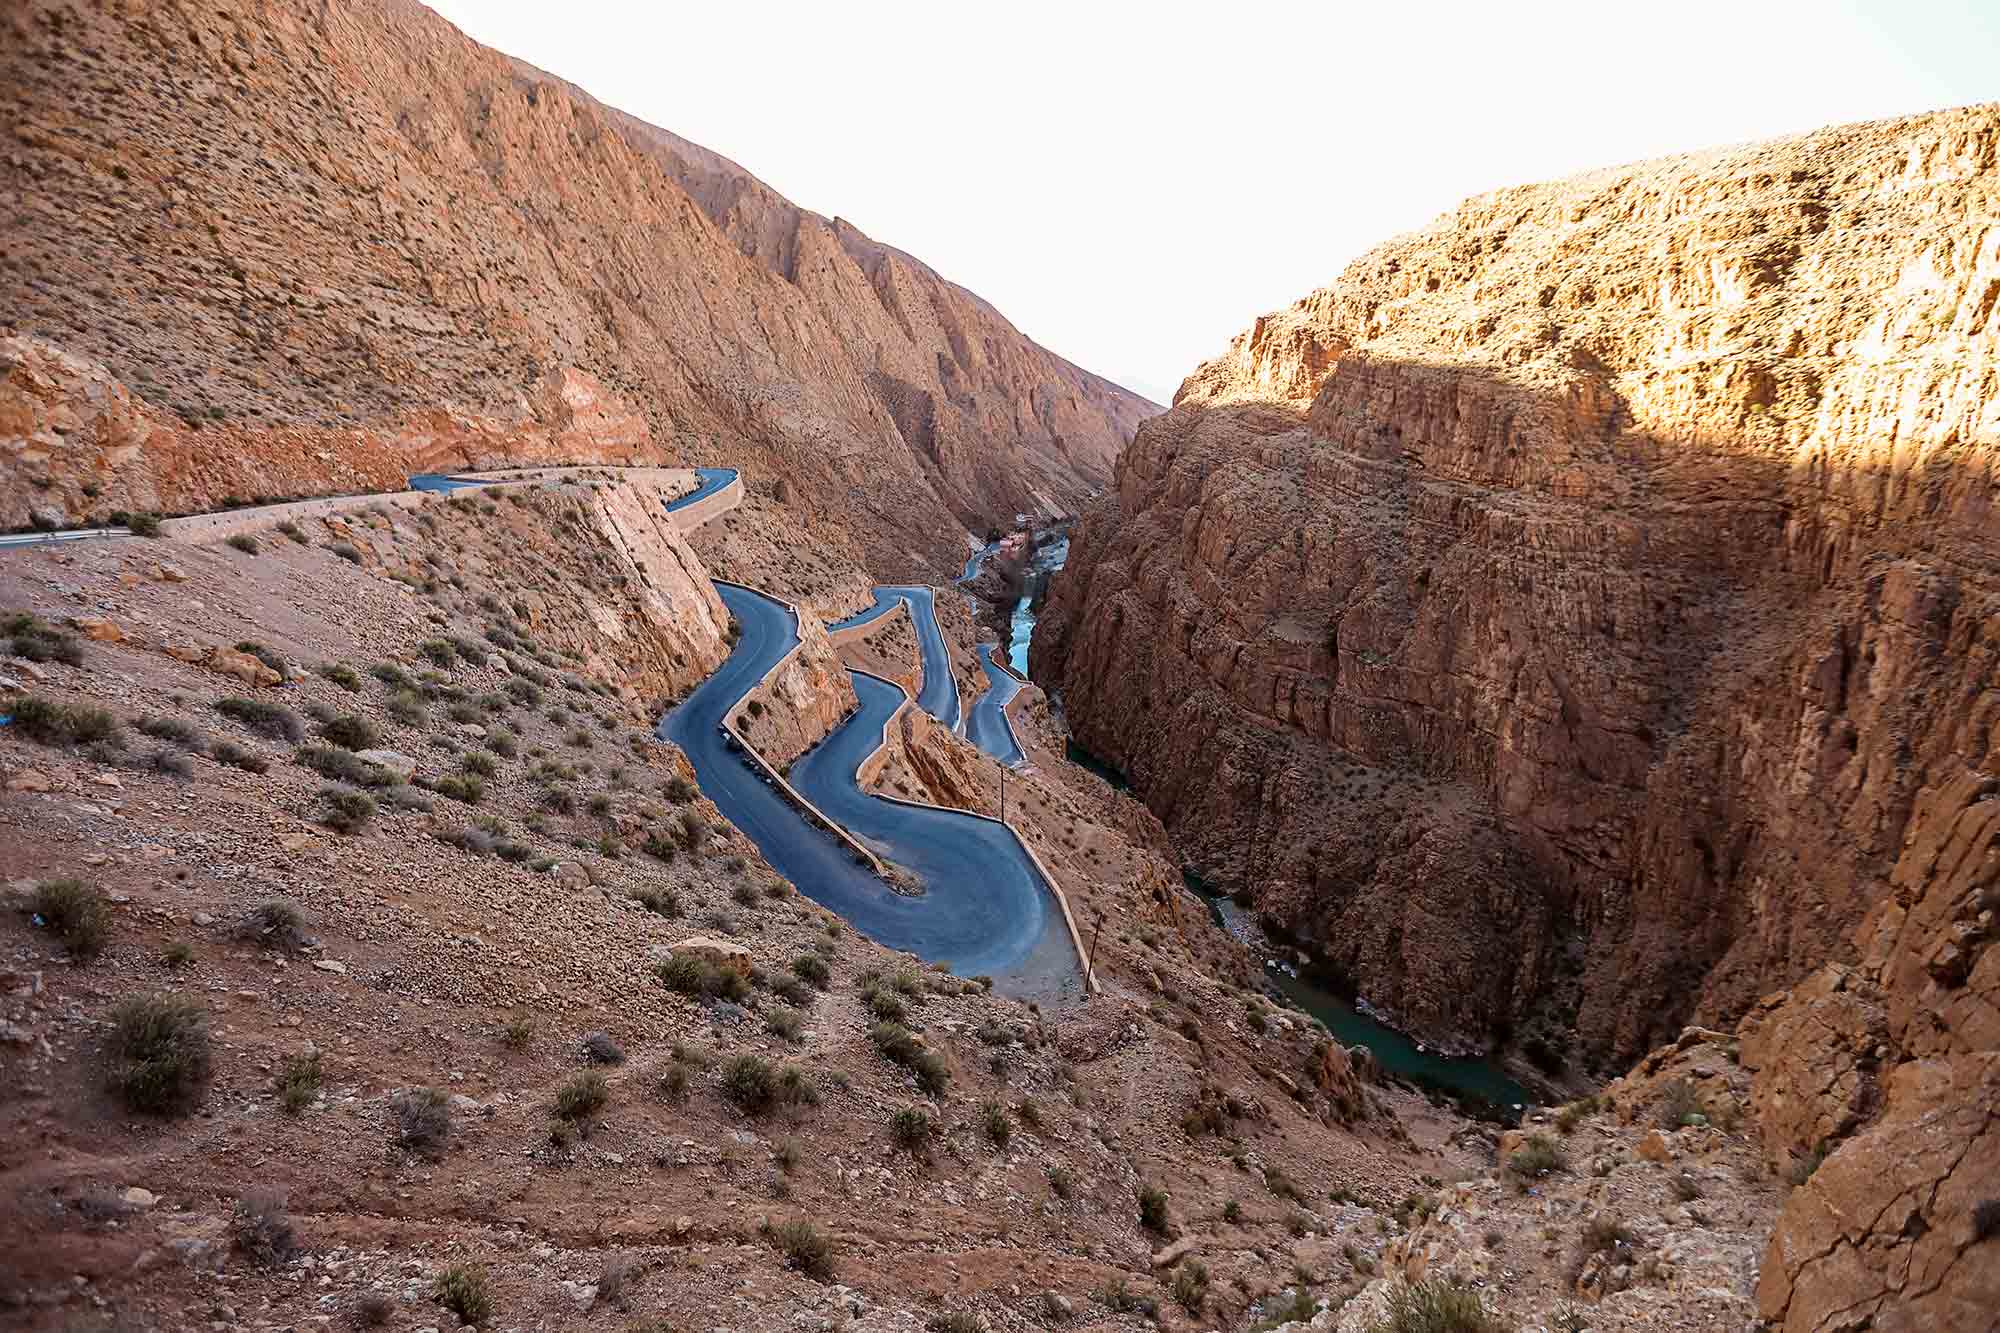 Driving through the Dades valley is one of the most scenic drives in the world. © ULLI MAIER & NISA MAIER